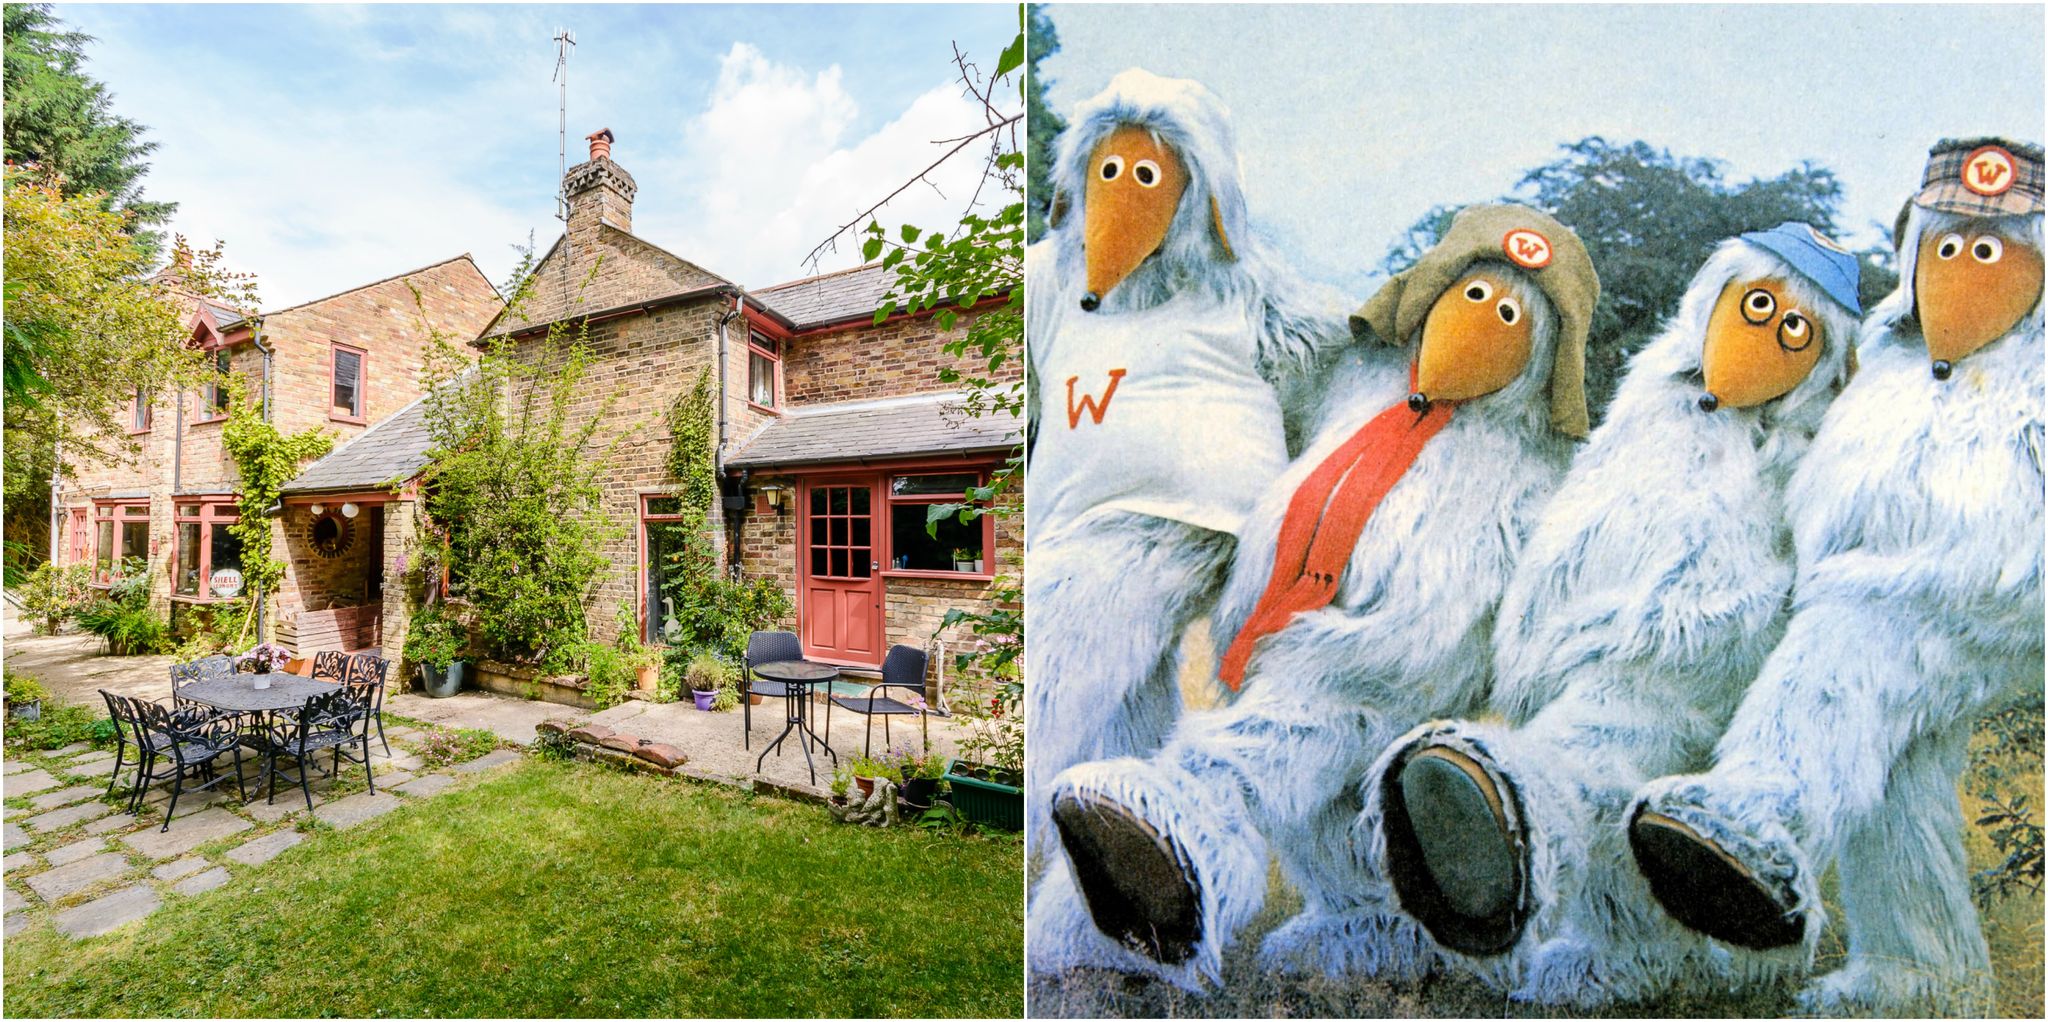 The Bothy - Hertfordshire - Wombles